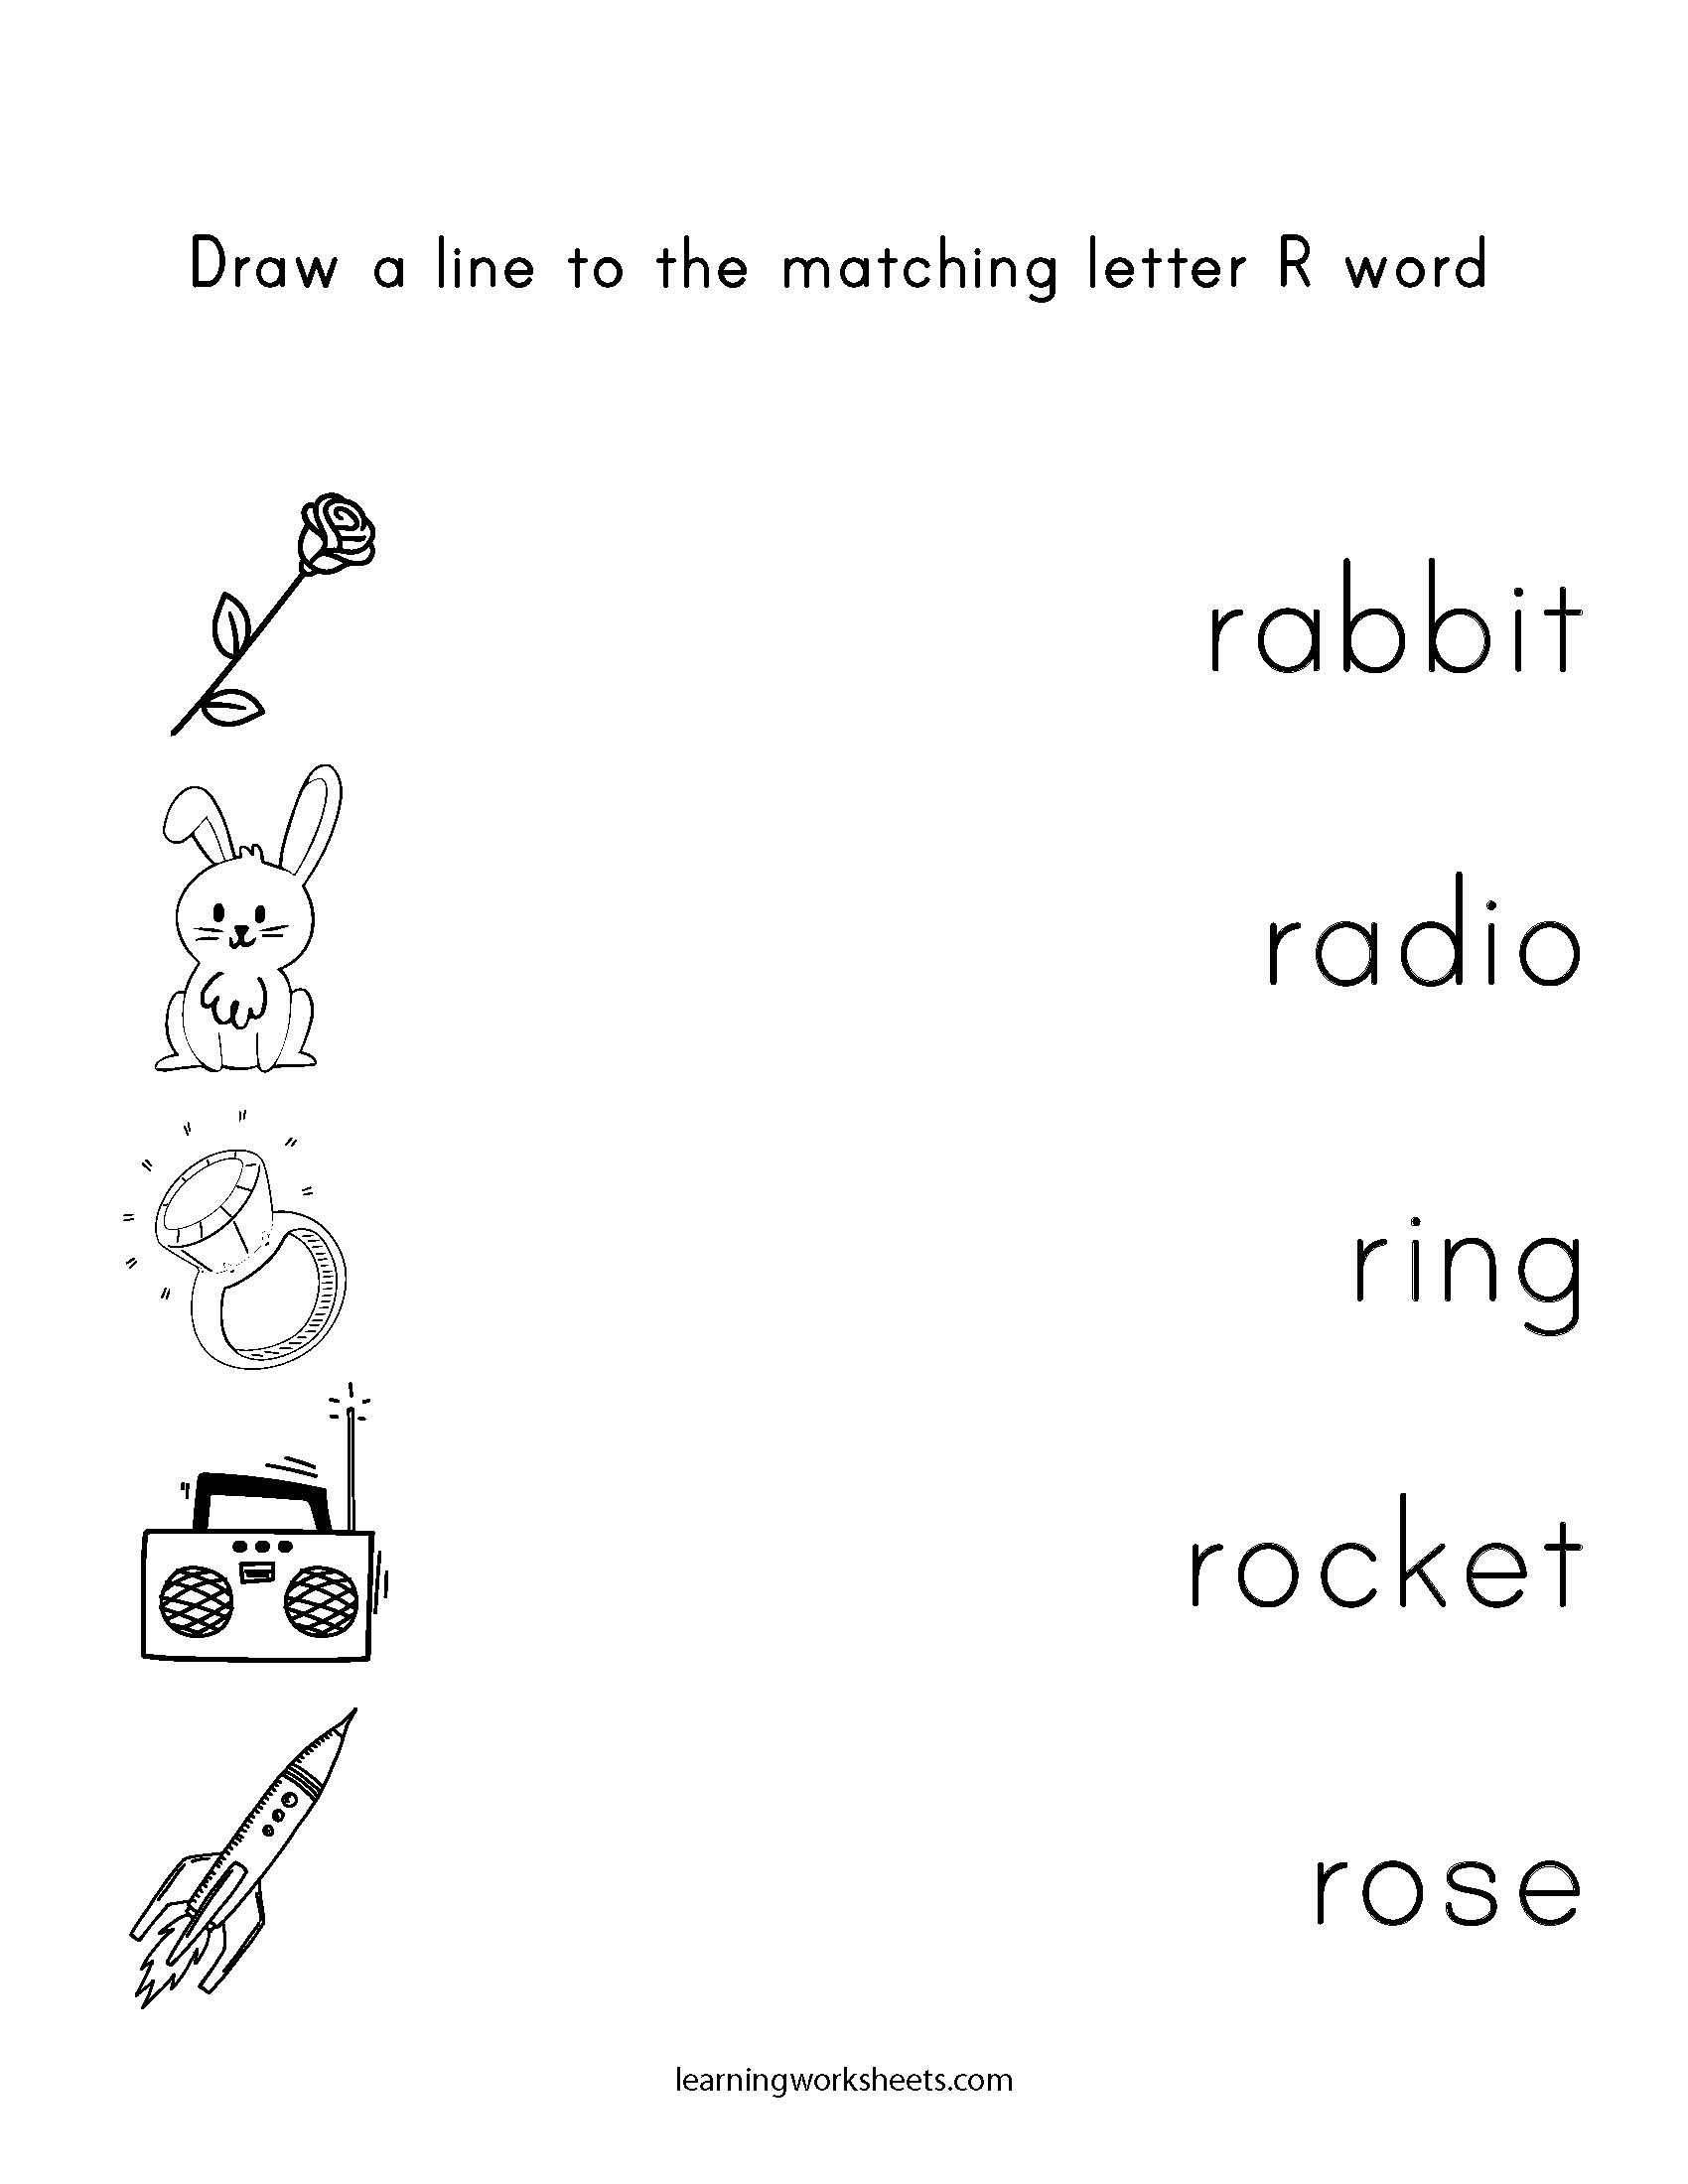 Draw a line to the matching letter R word - learning worksheets